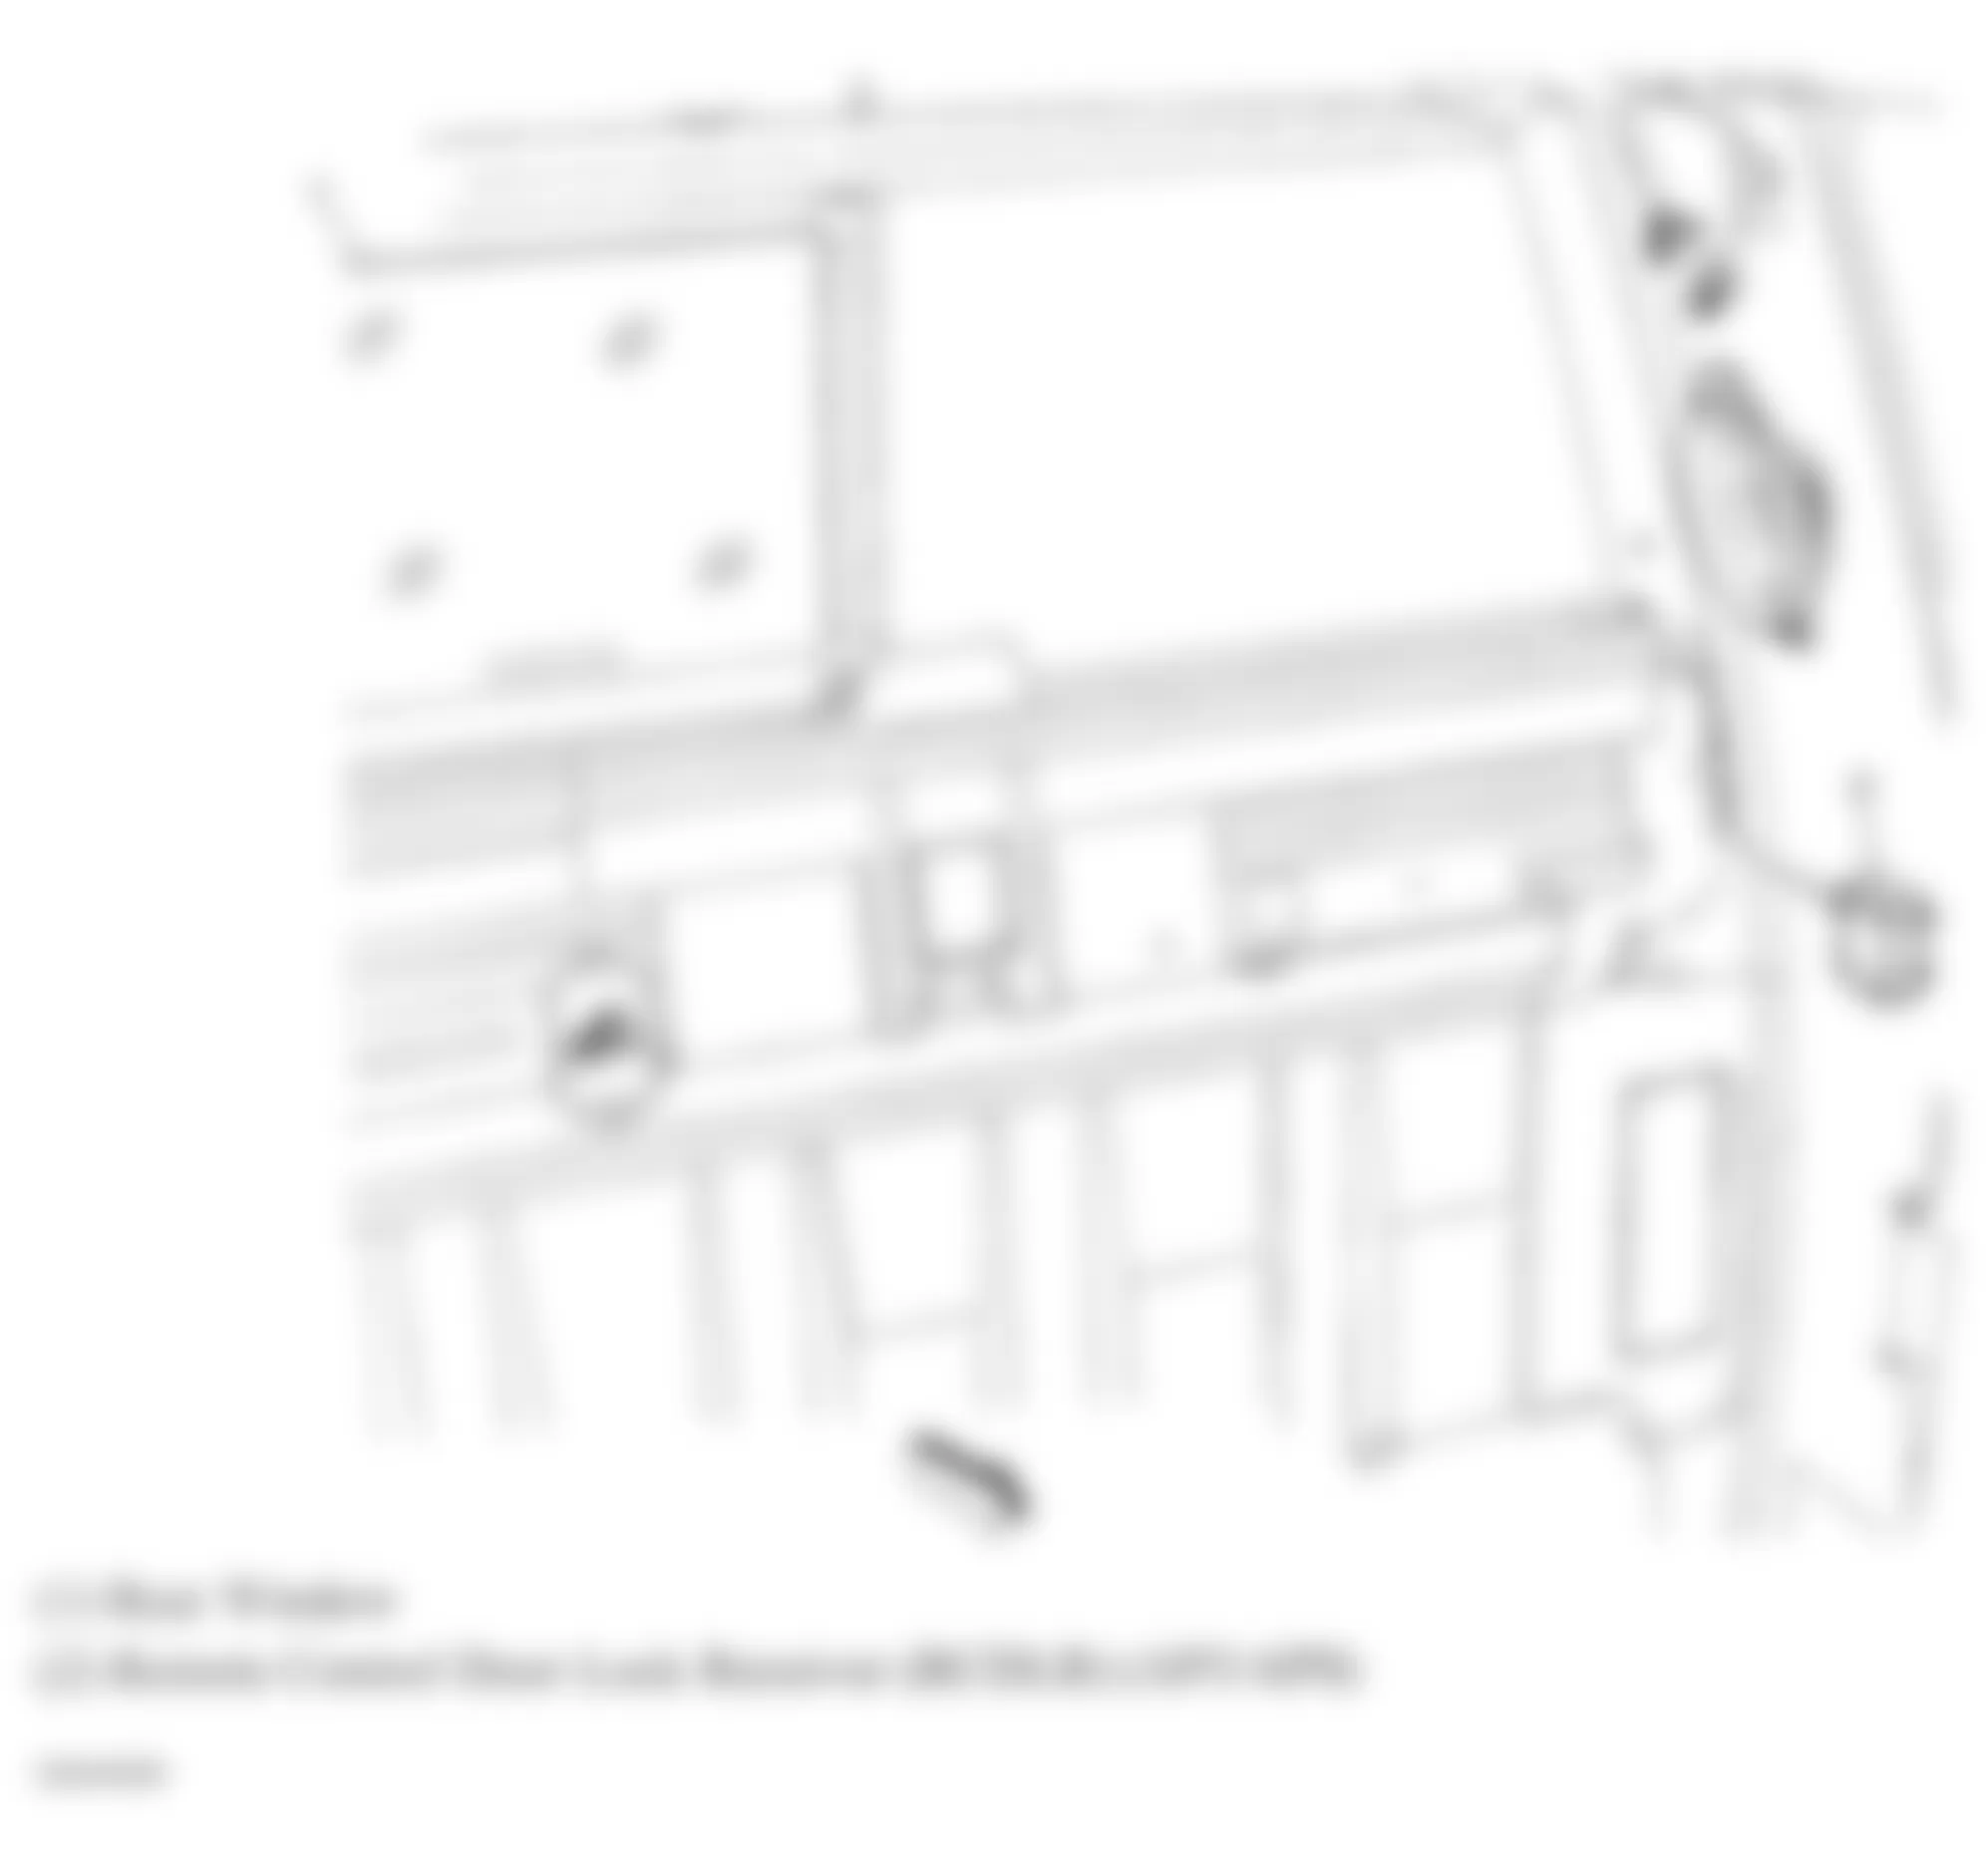 GMC Sierra 3500 HD 2010 - Component Locations -  Left Rear Of Passenger Compartment